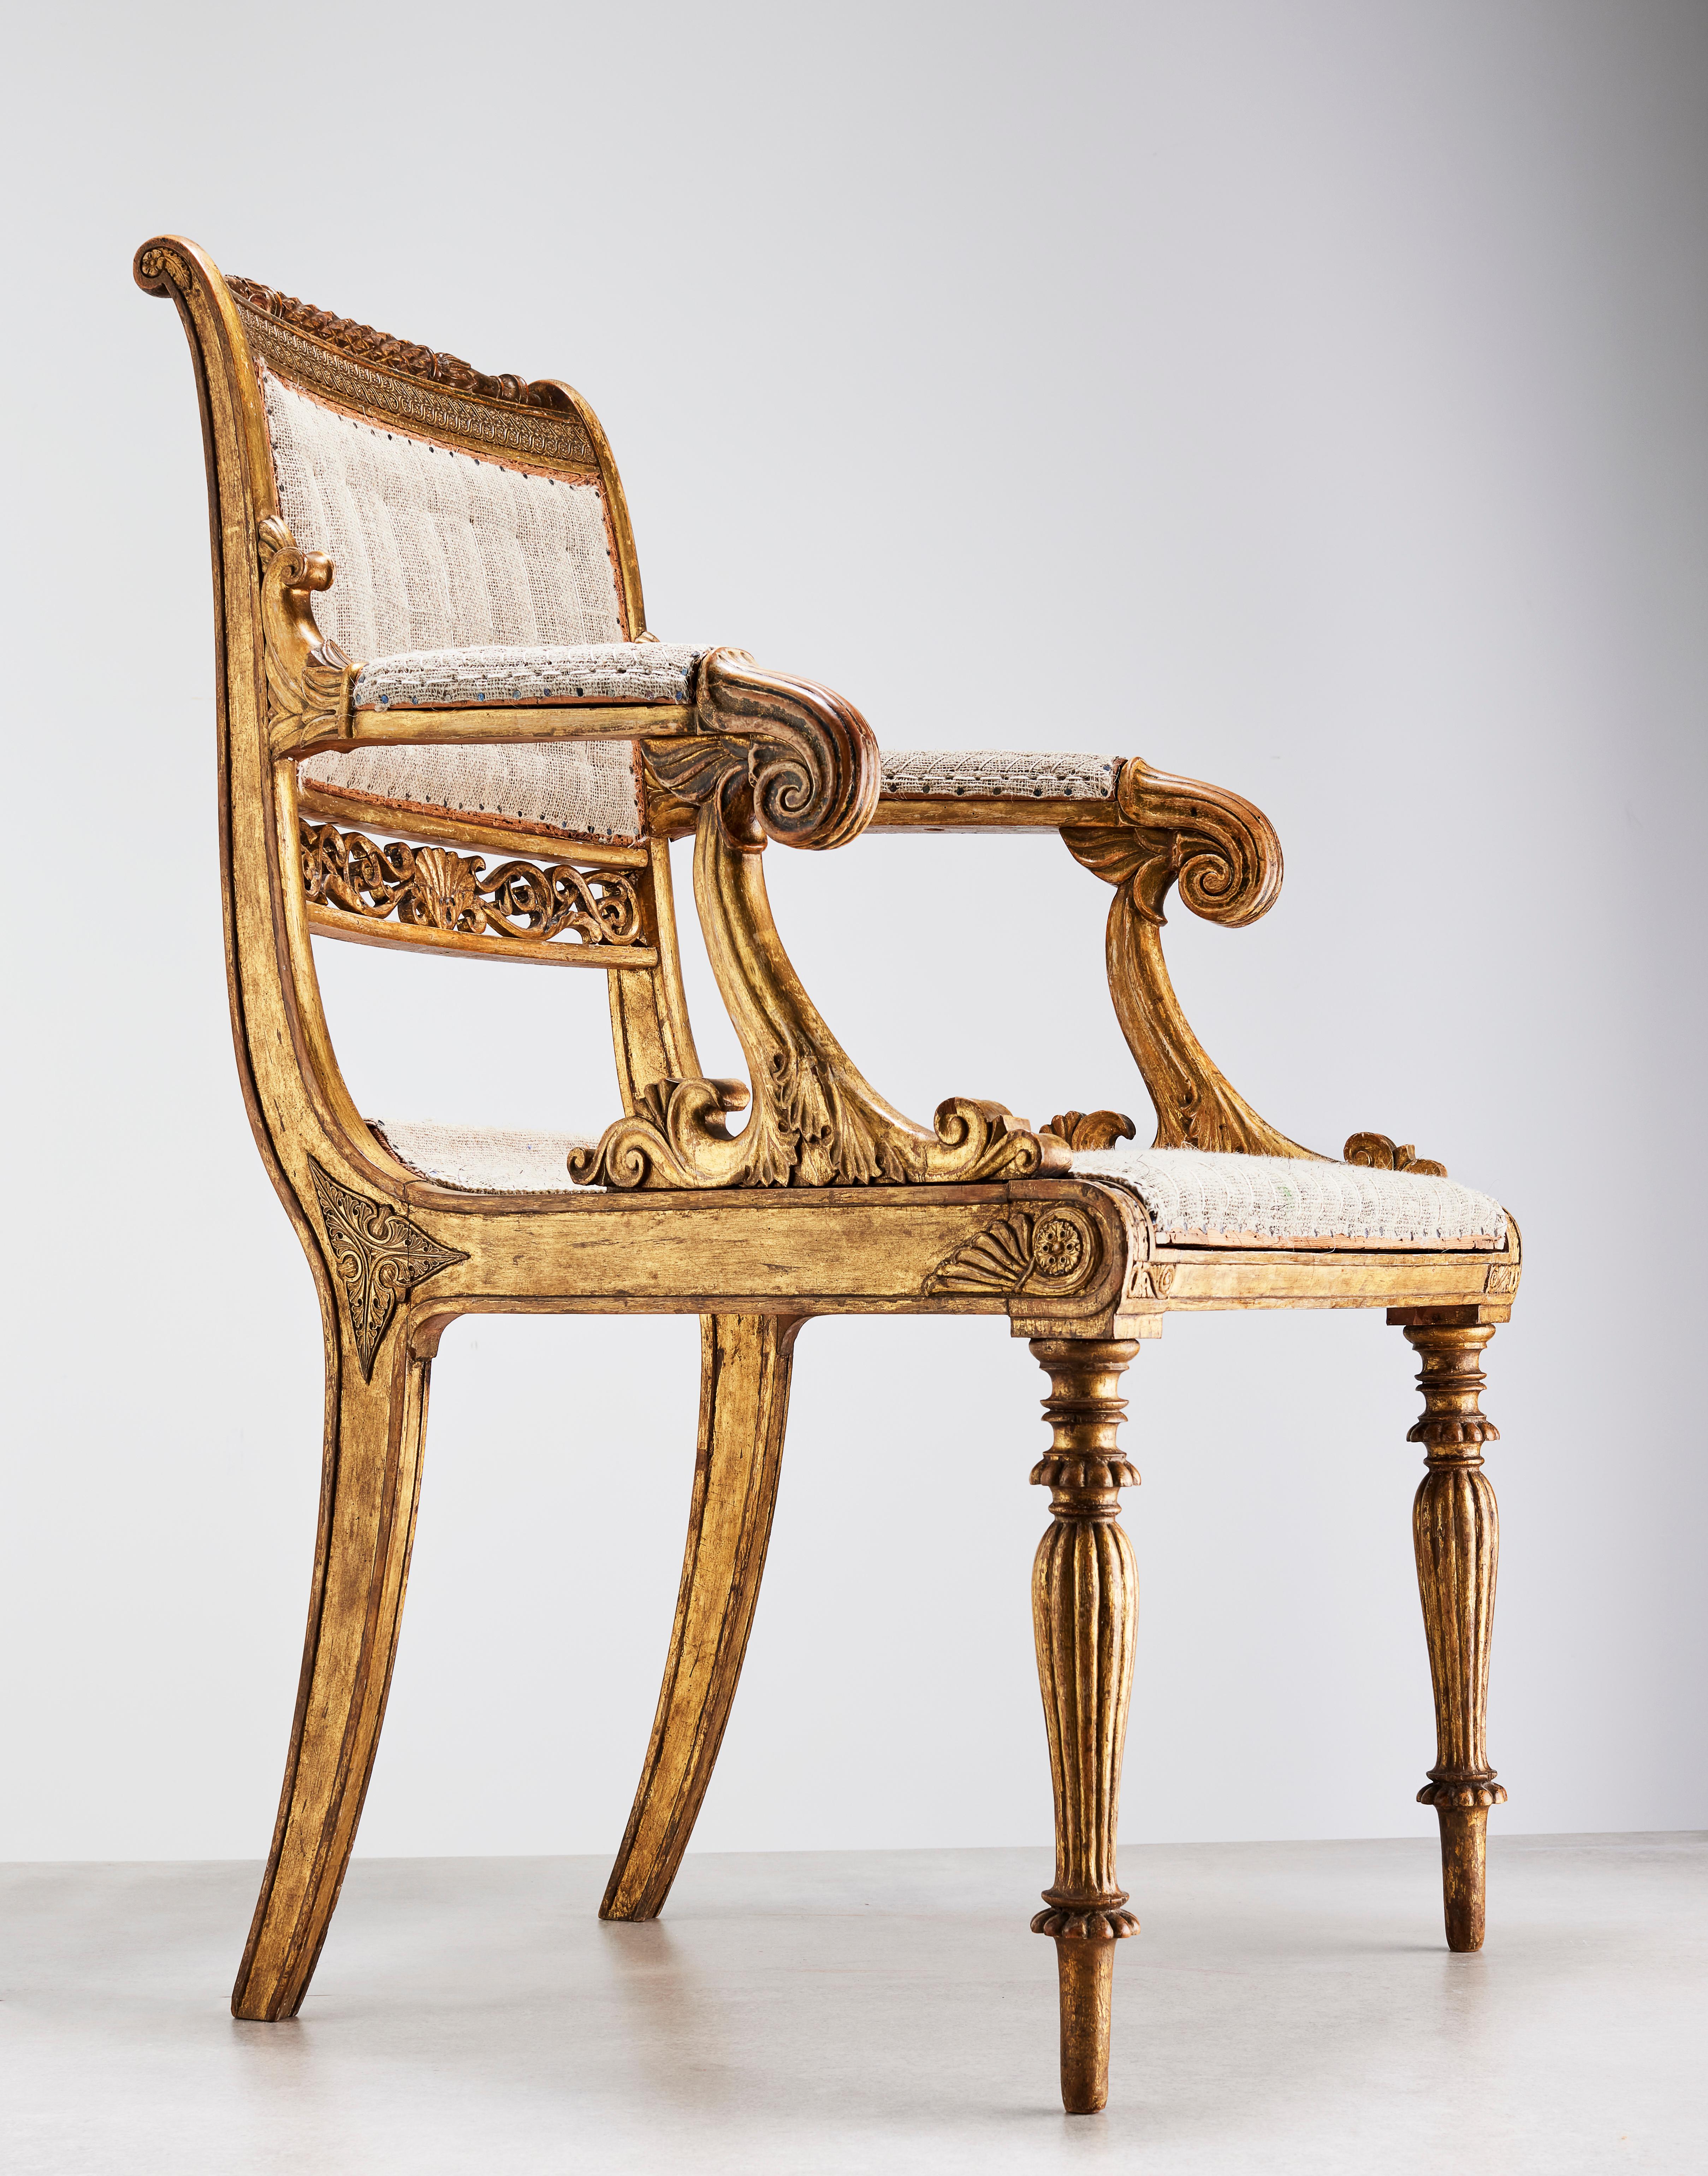 A very decorative and large giltwood armchair after a design by the famous Danish Architect Gustav Friedrich Hetsch, (1788-1964). The German born architect worked mostly in Copenhagen and made a series of designs for furniture and interior